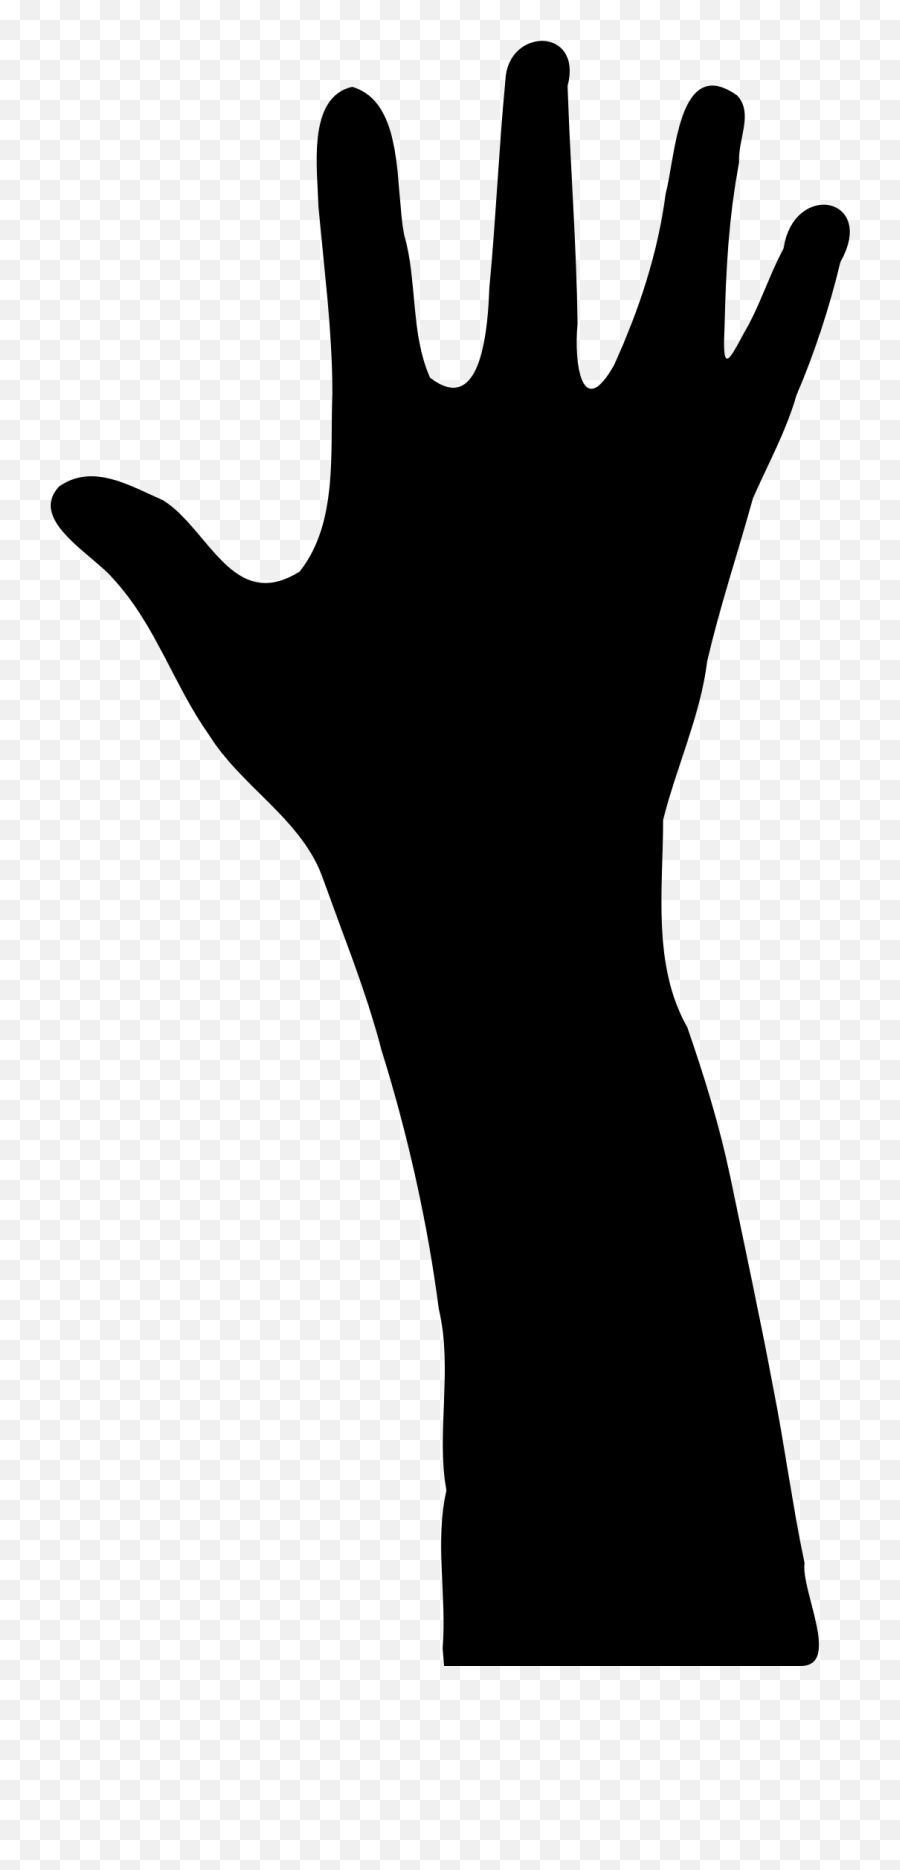 Raised Hands Png Images Collection For Free Download - Hand Png Black And White Emoji,Raised Hands Emoji